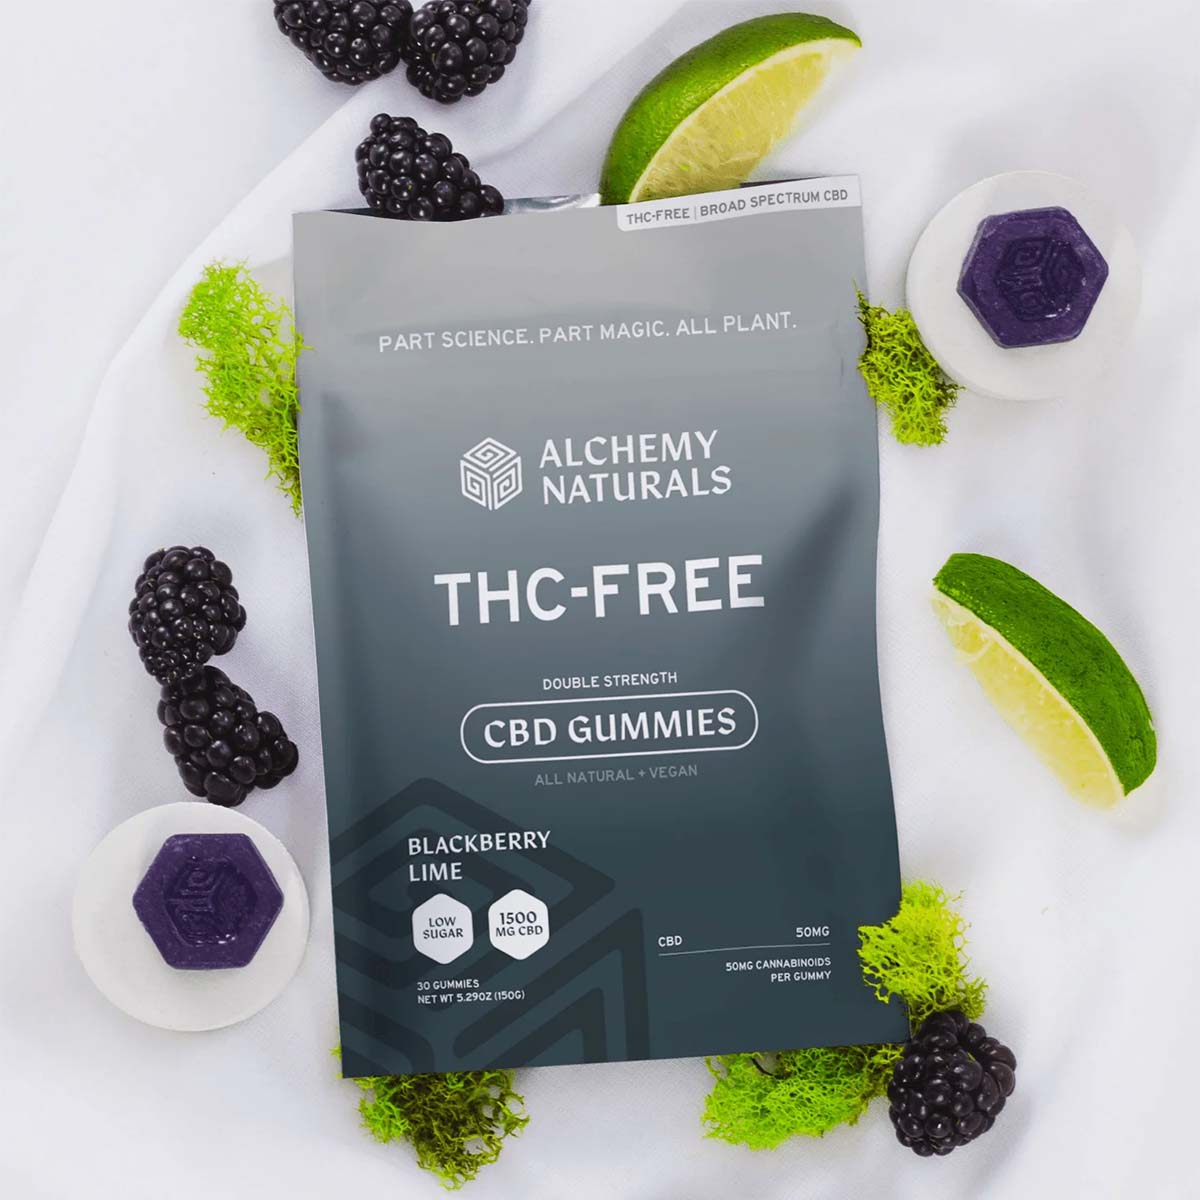 Gray bag of Alchemy Naturals Broad Spectrum CBD Gummies surrounded by fruits, moss, and purple gummies